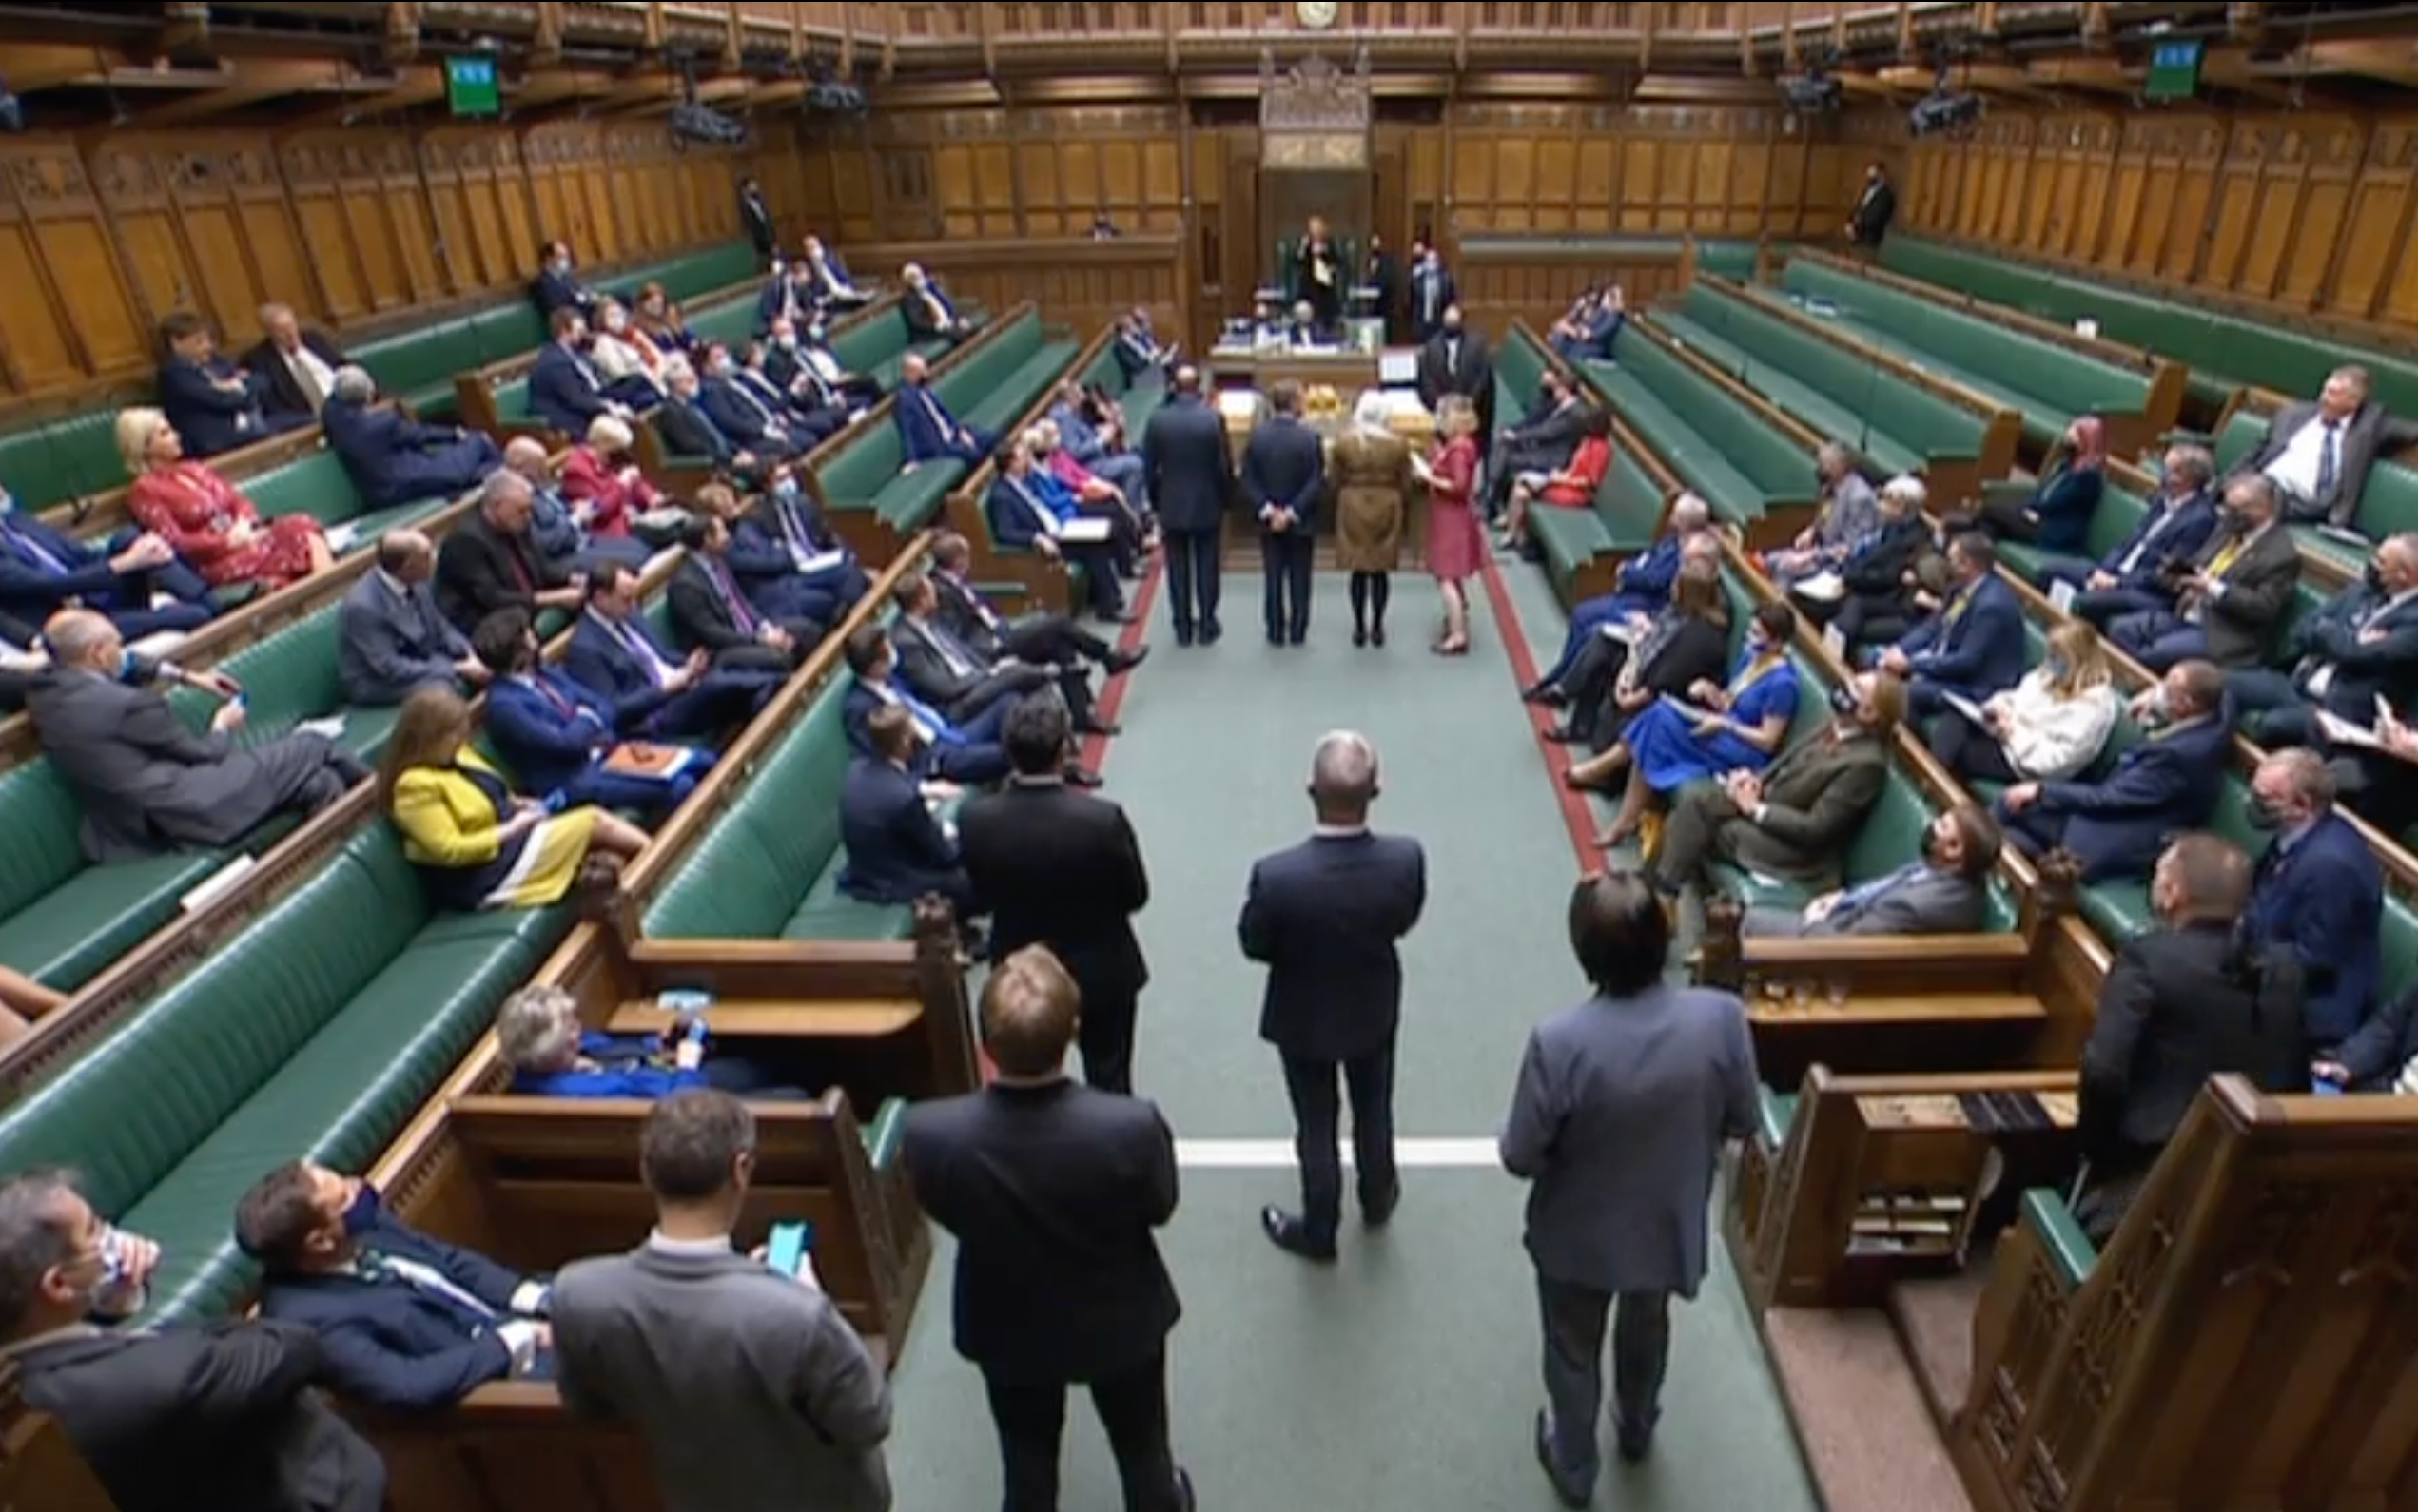 MPs vote on the new health regulations